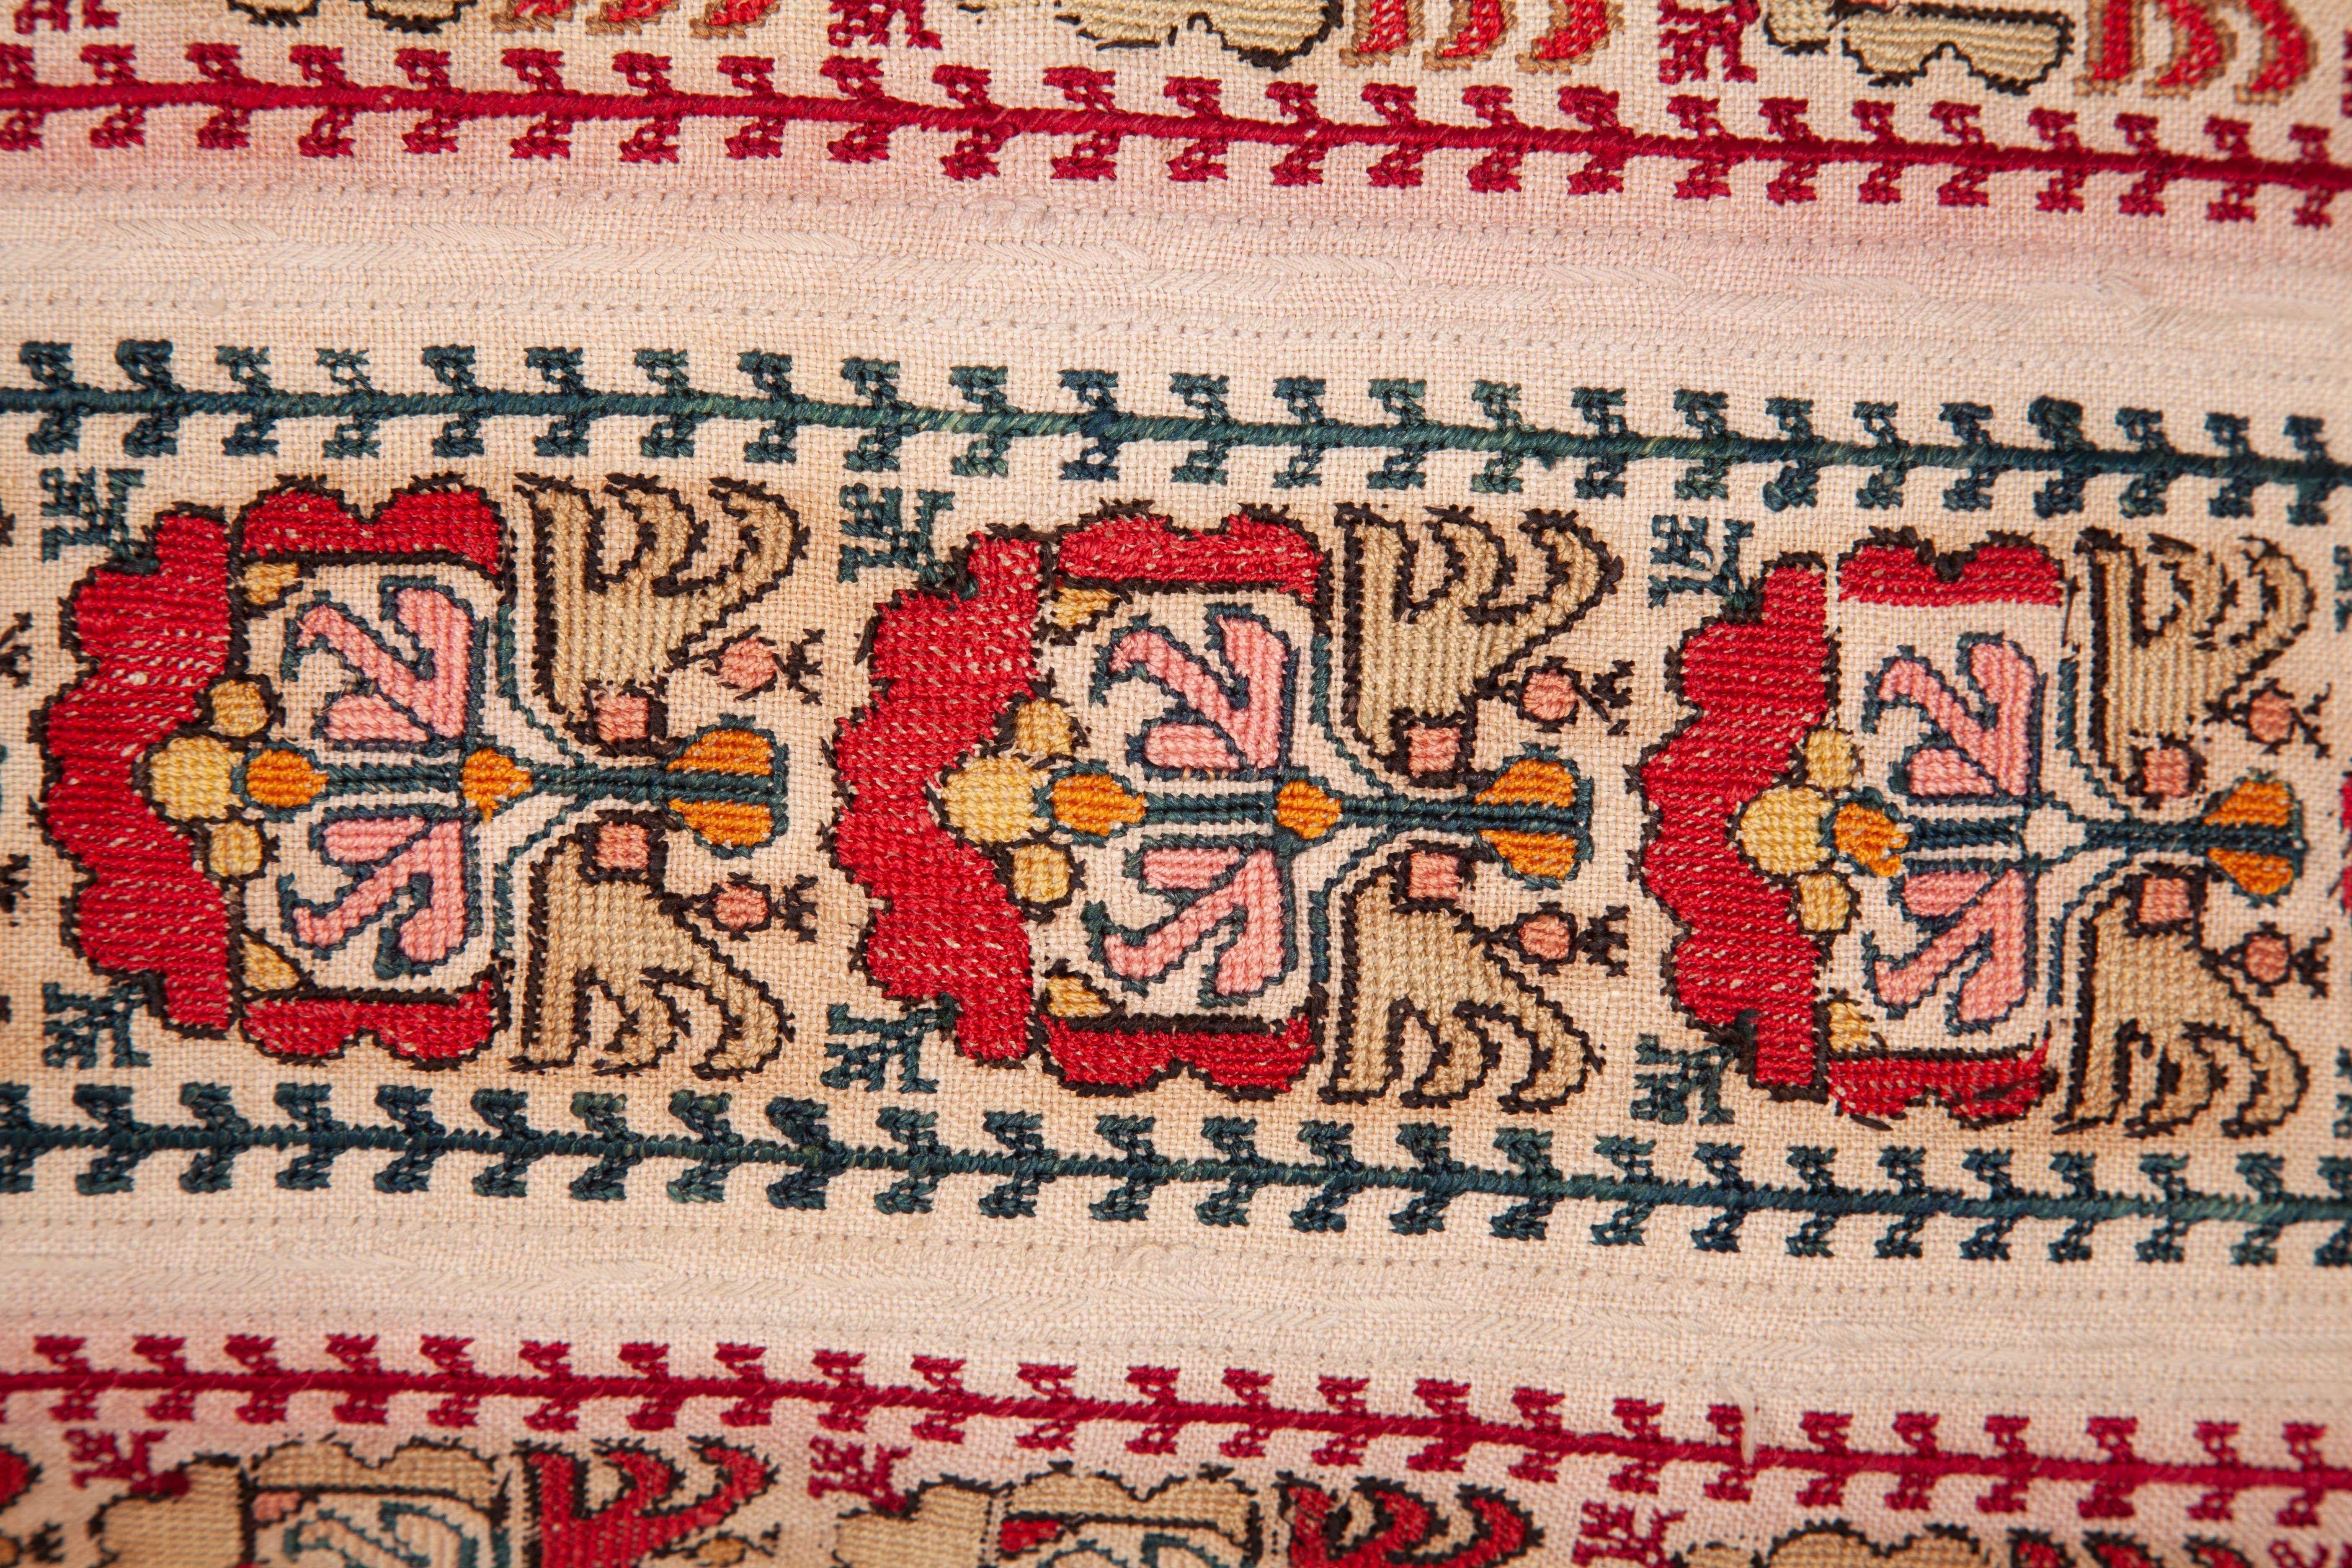 Turkish Antique Pillow Case Fashioned From an Ottoman Greek Embroidery, 19th Century